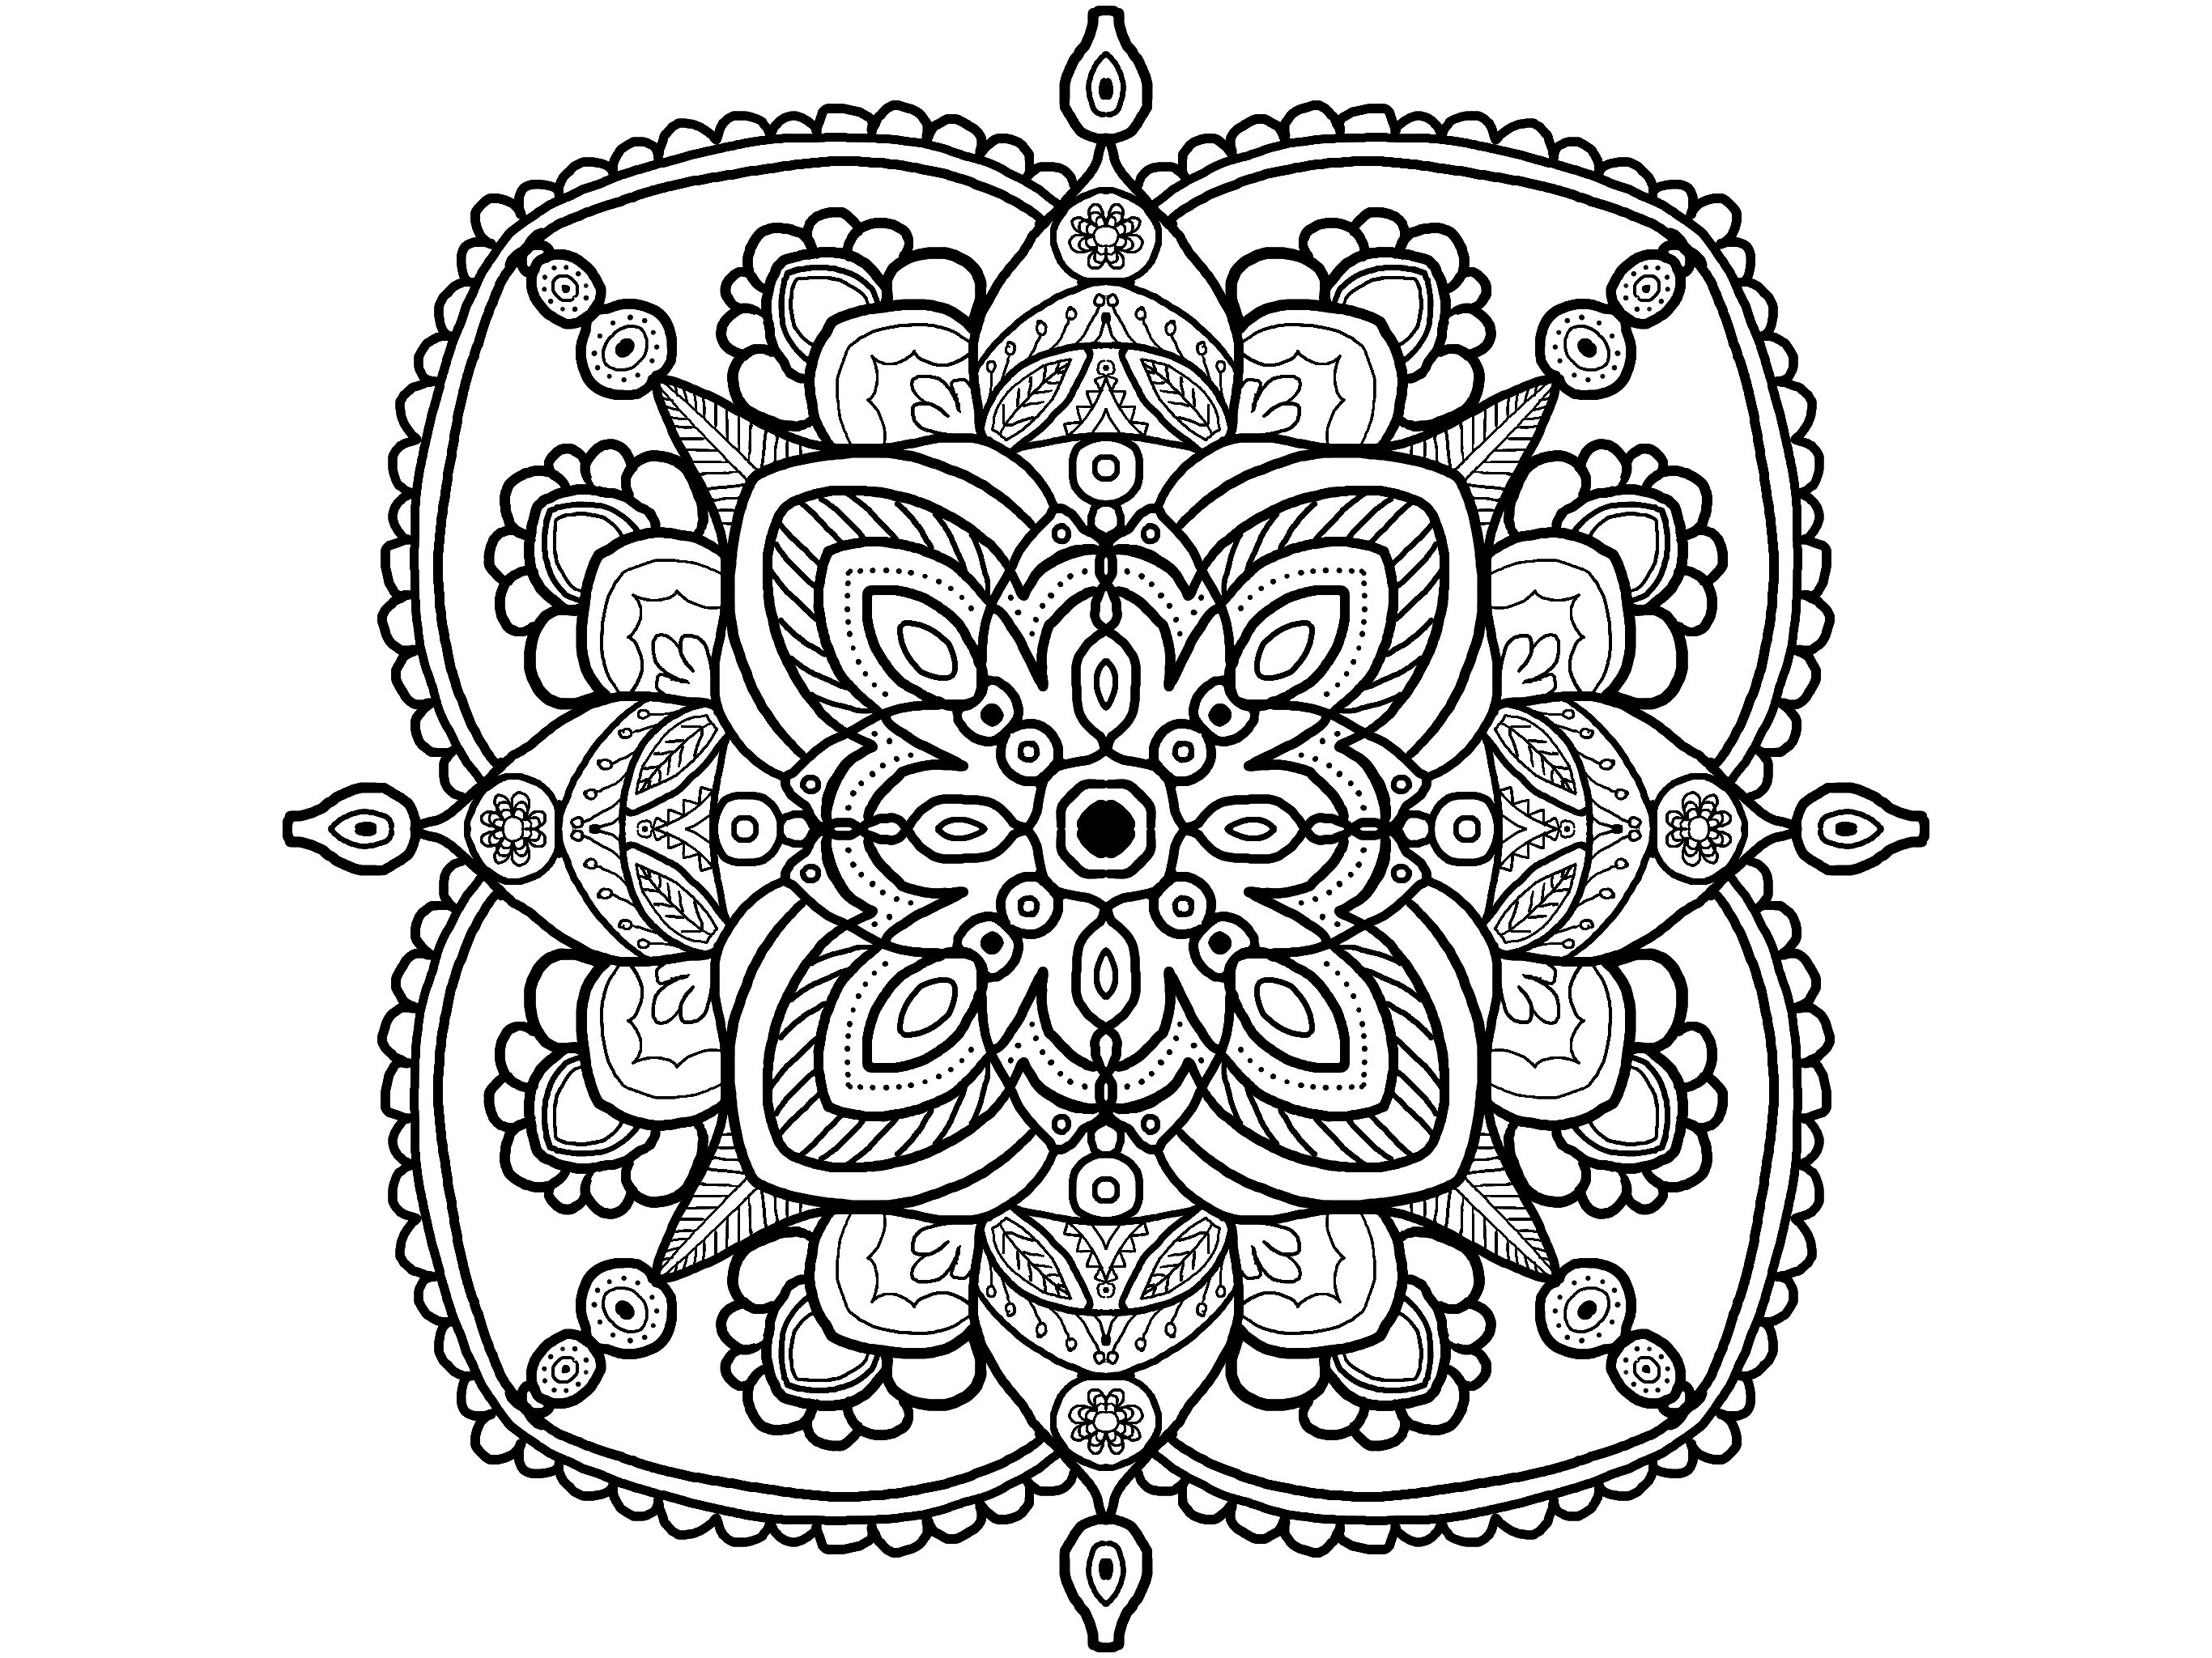 Therapeutic mandala coloring pages